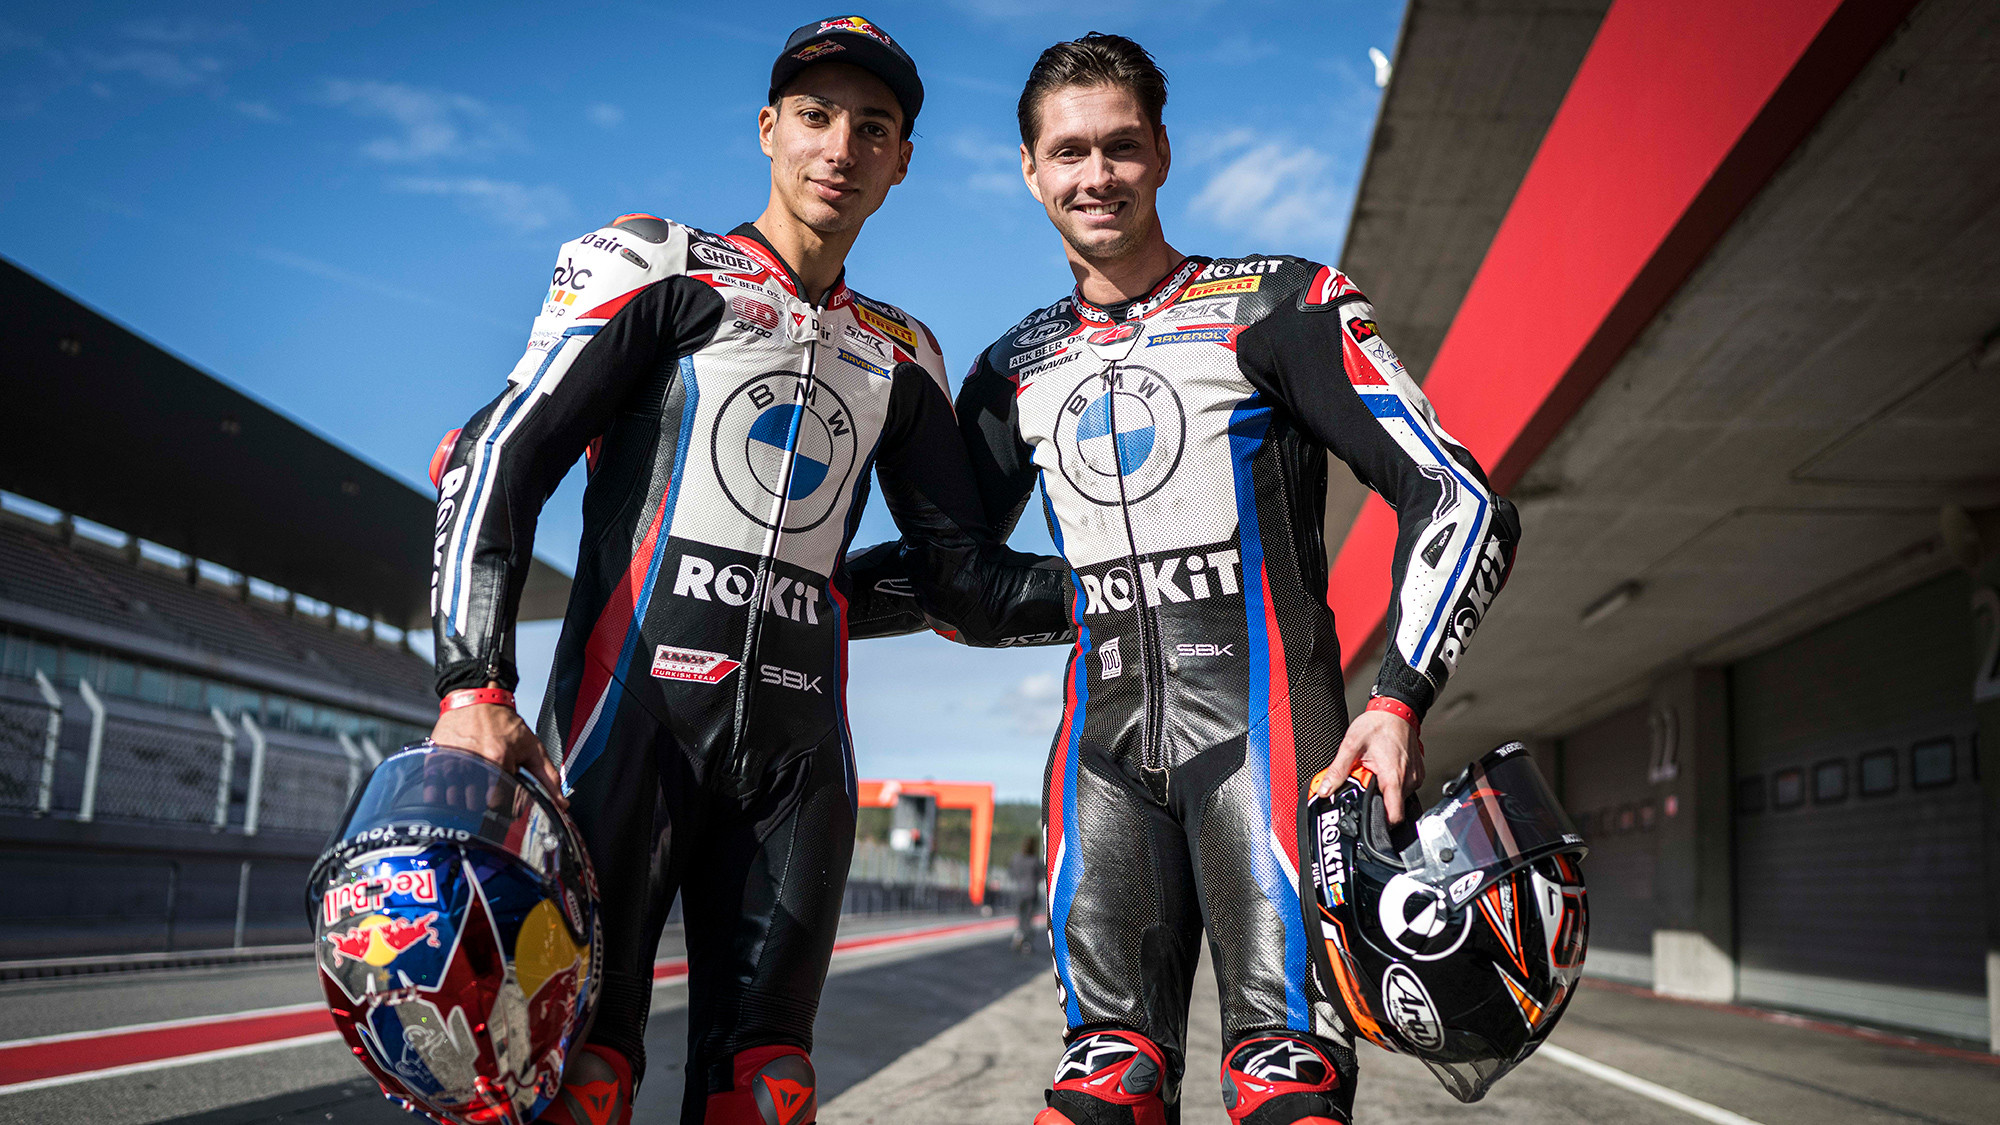 Strong new partnership in WorldSBK: ROKiT is Title Partner of the